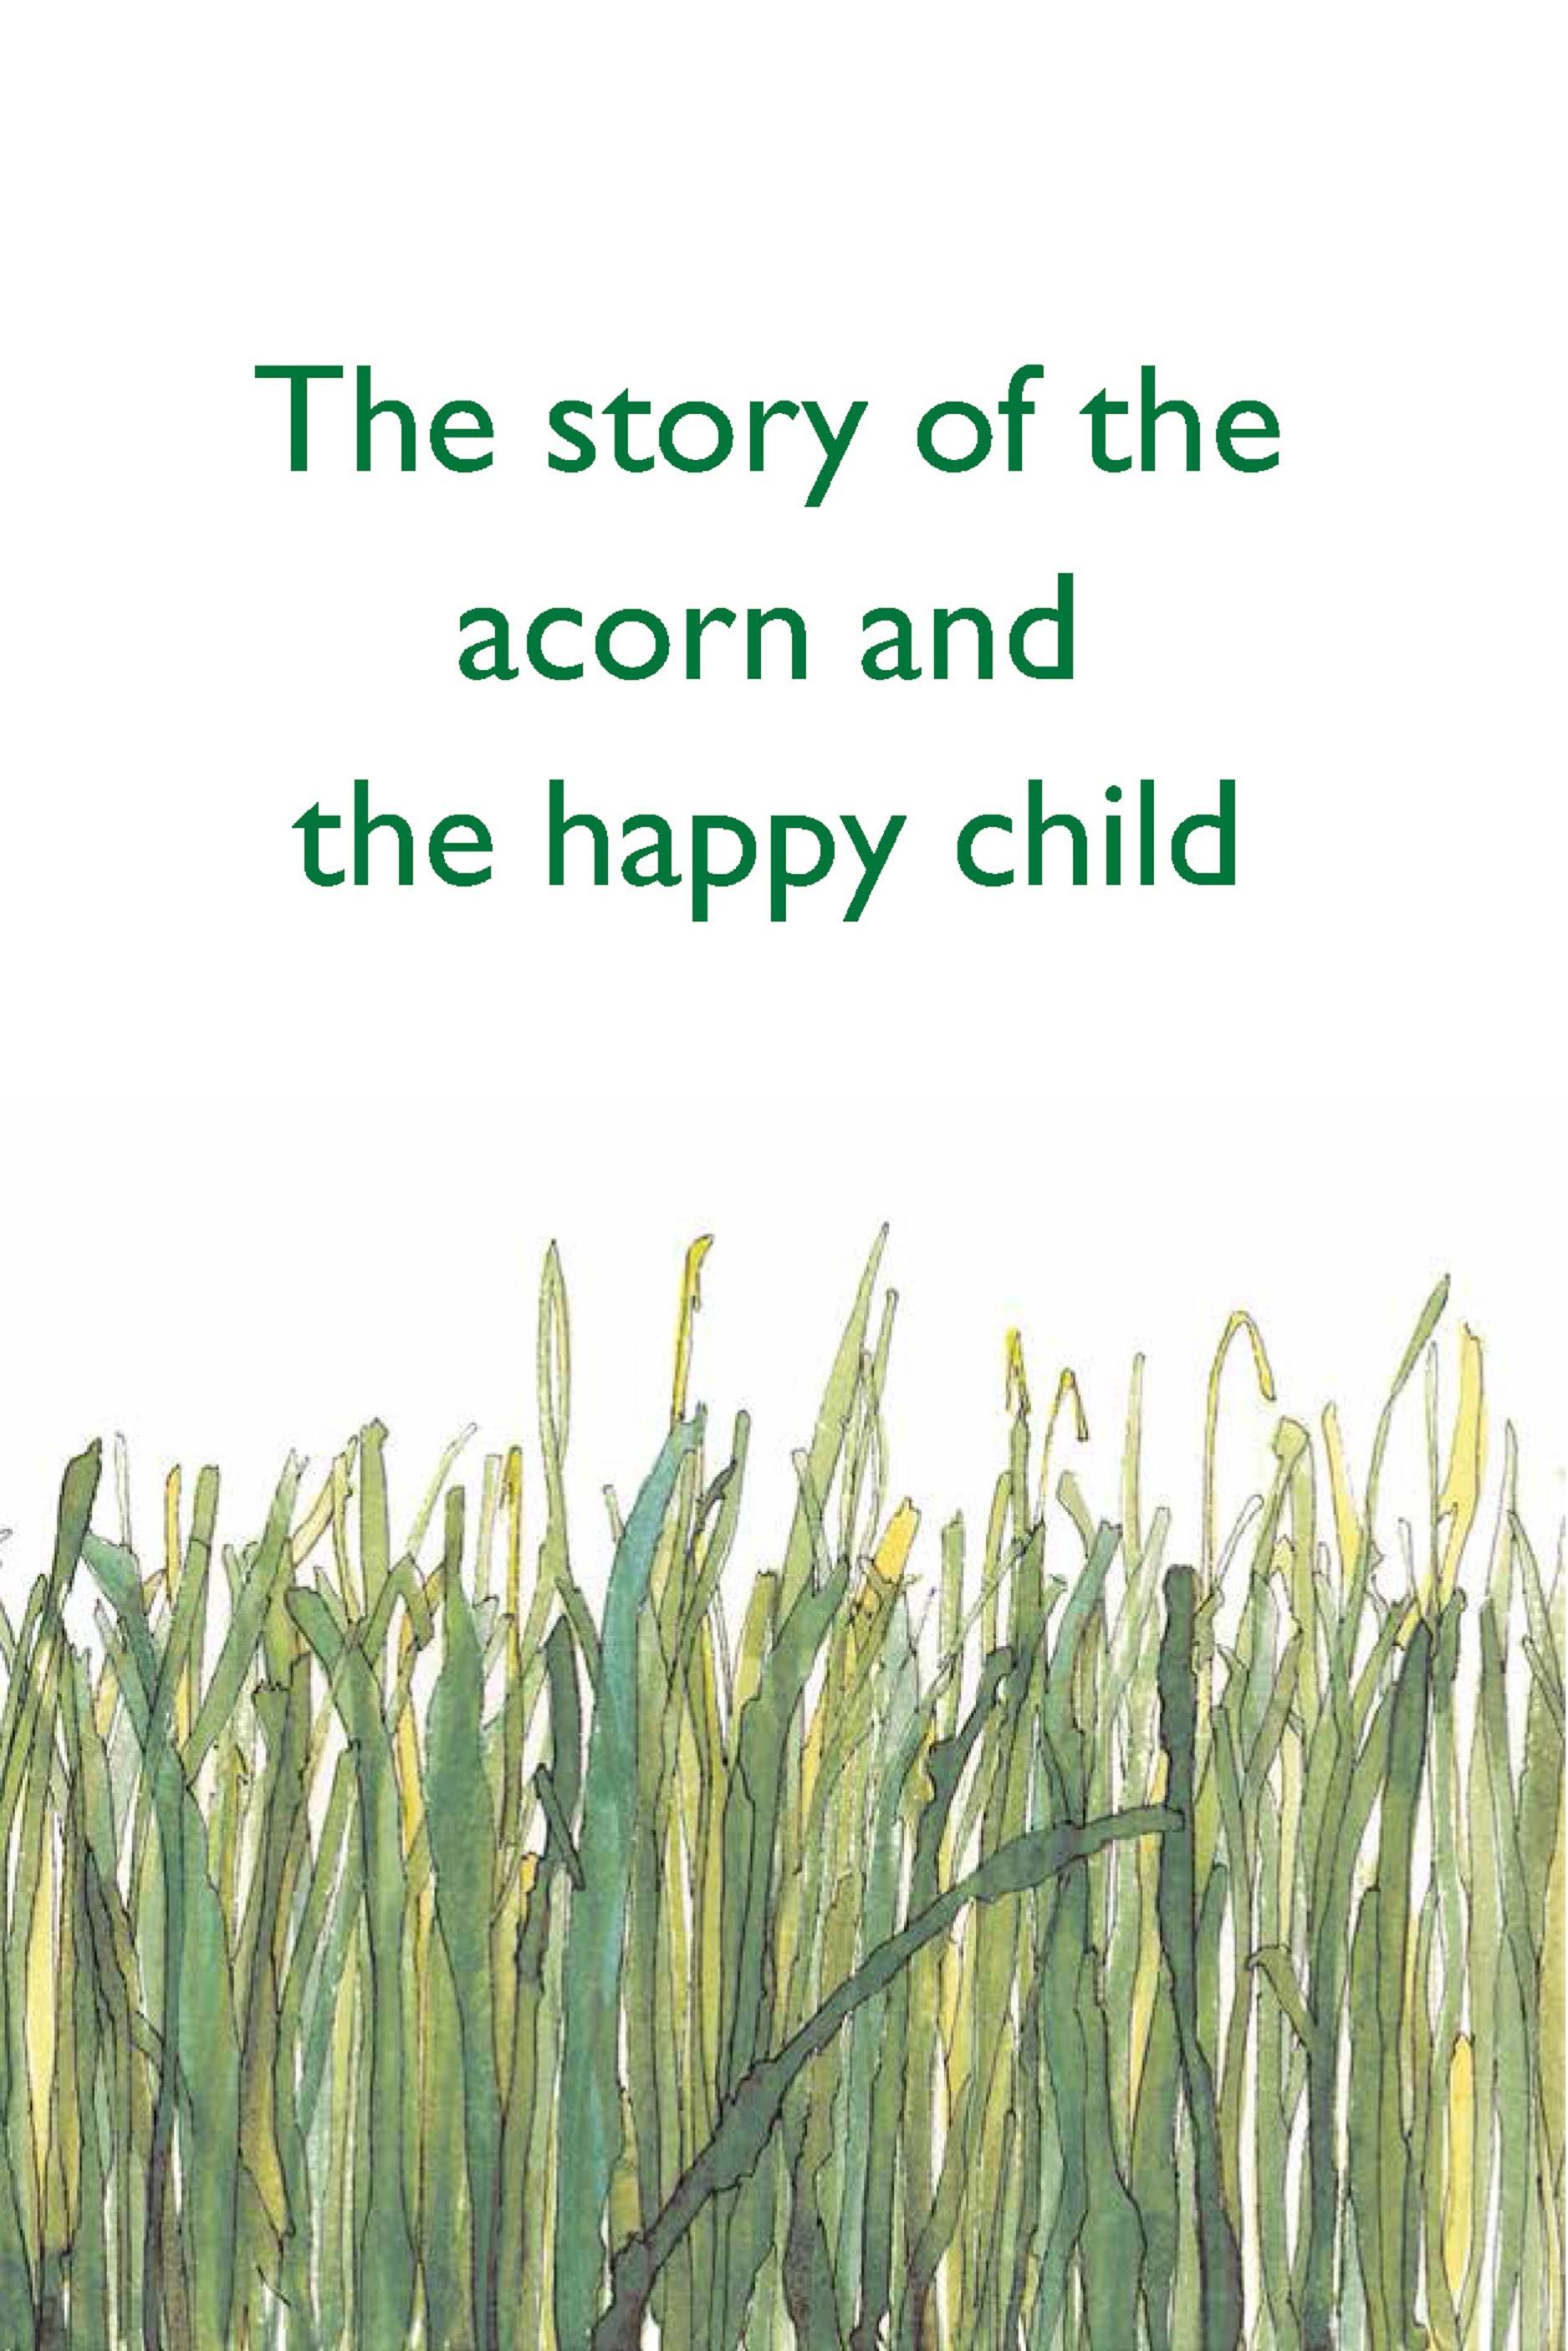 The story of the acorn and the happy child